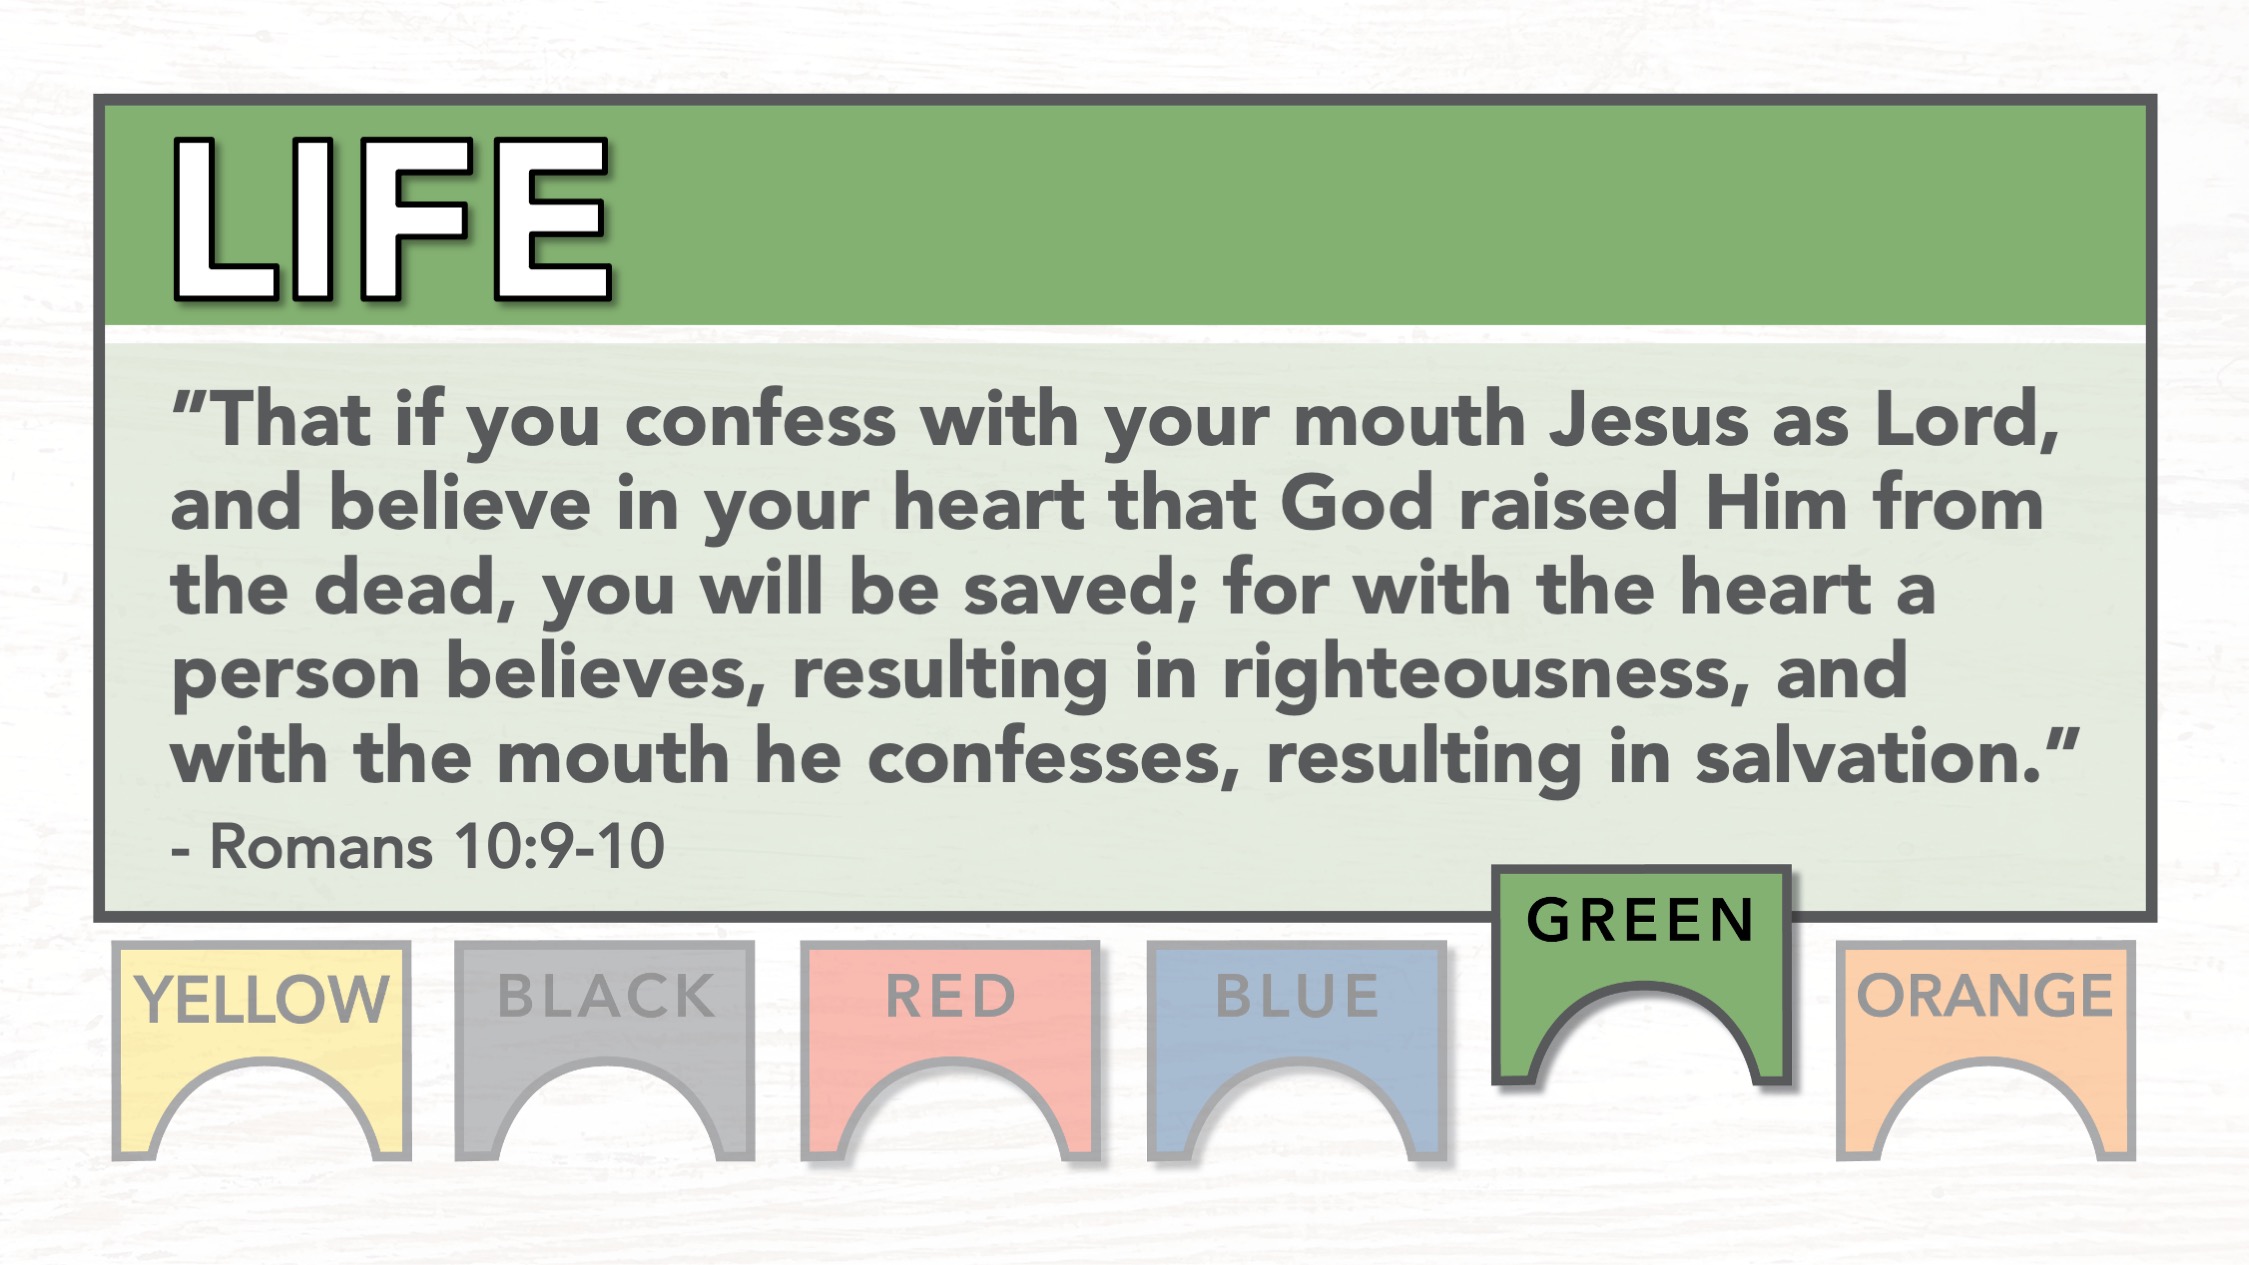 Green - Life: "That if you confess with your mouth Jesus as Lord, and believe in your heart that God raised Him from the dead, you will be saved; for with the heart a person believes, resulting in righteousness, and with the mouth he confesses, resulting in salvation." Romans 10:9-10